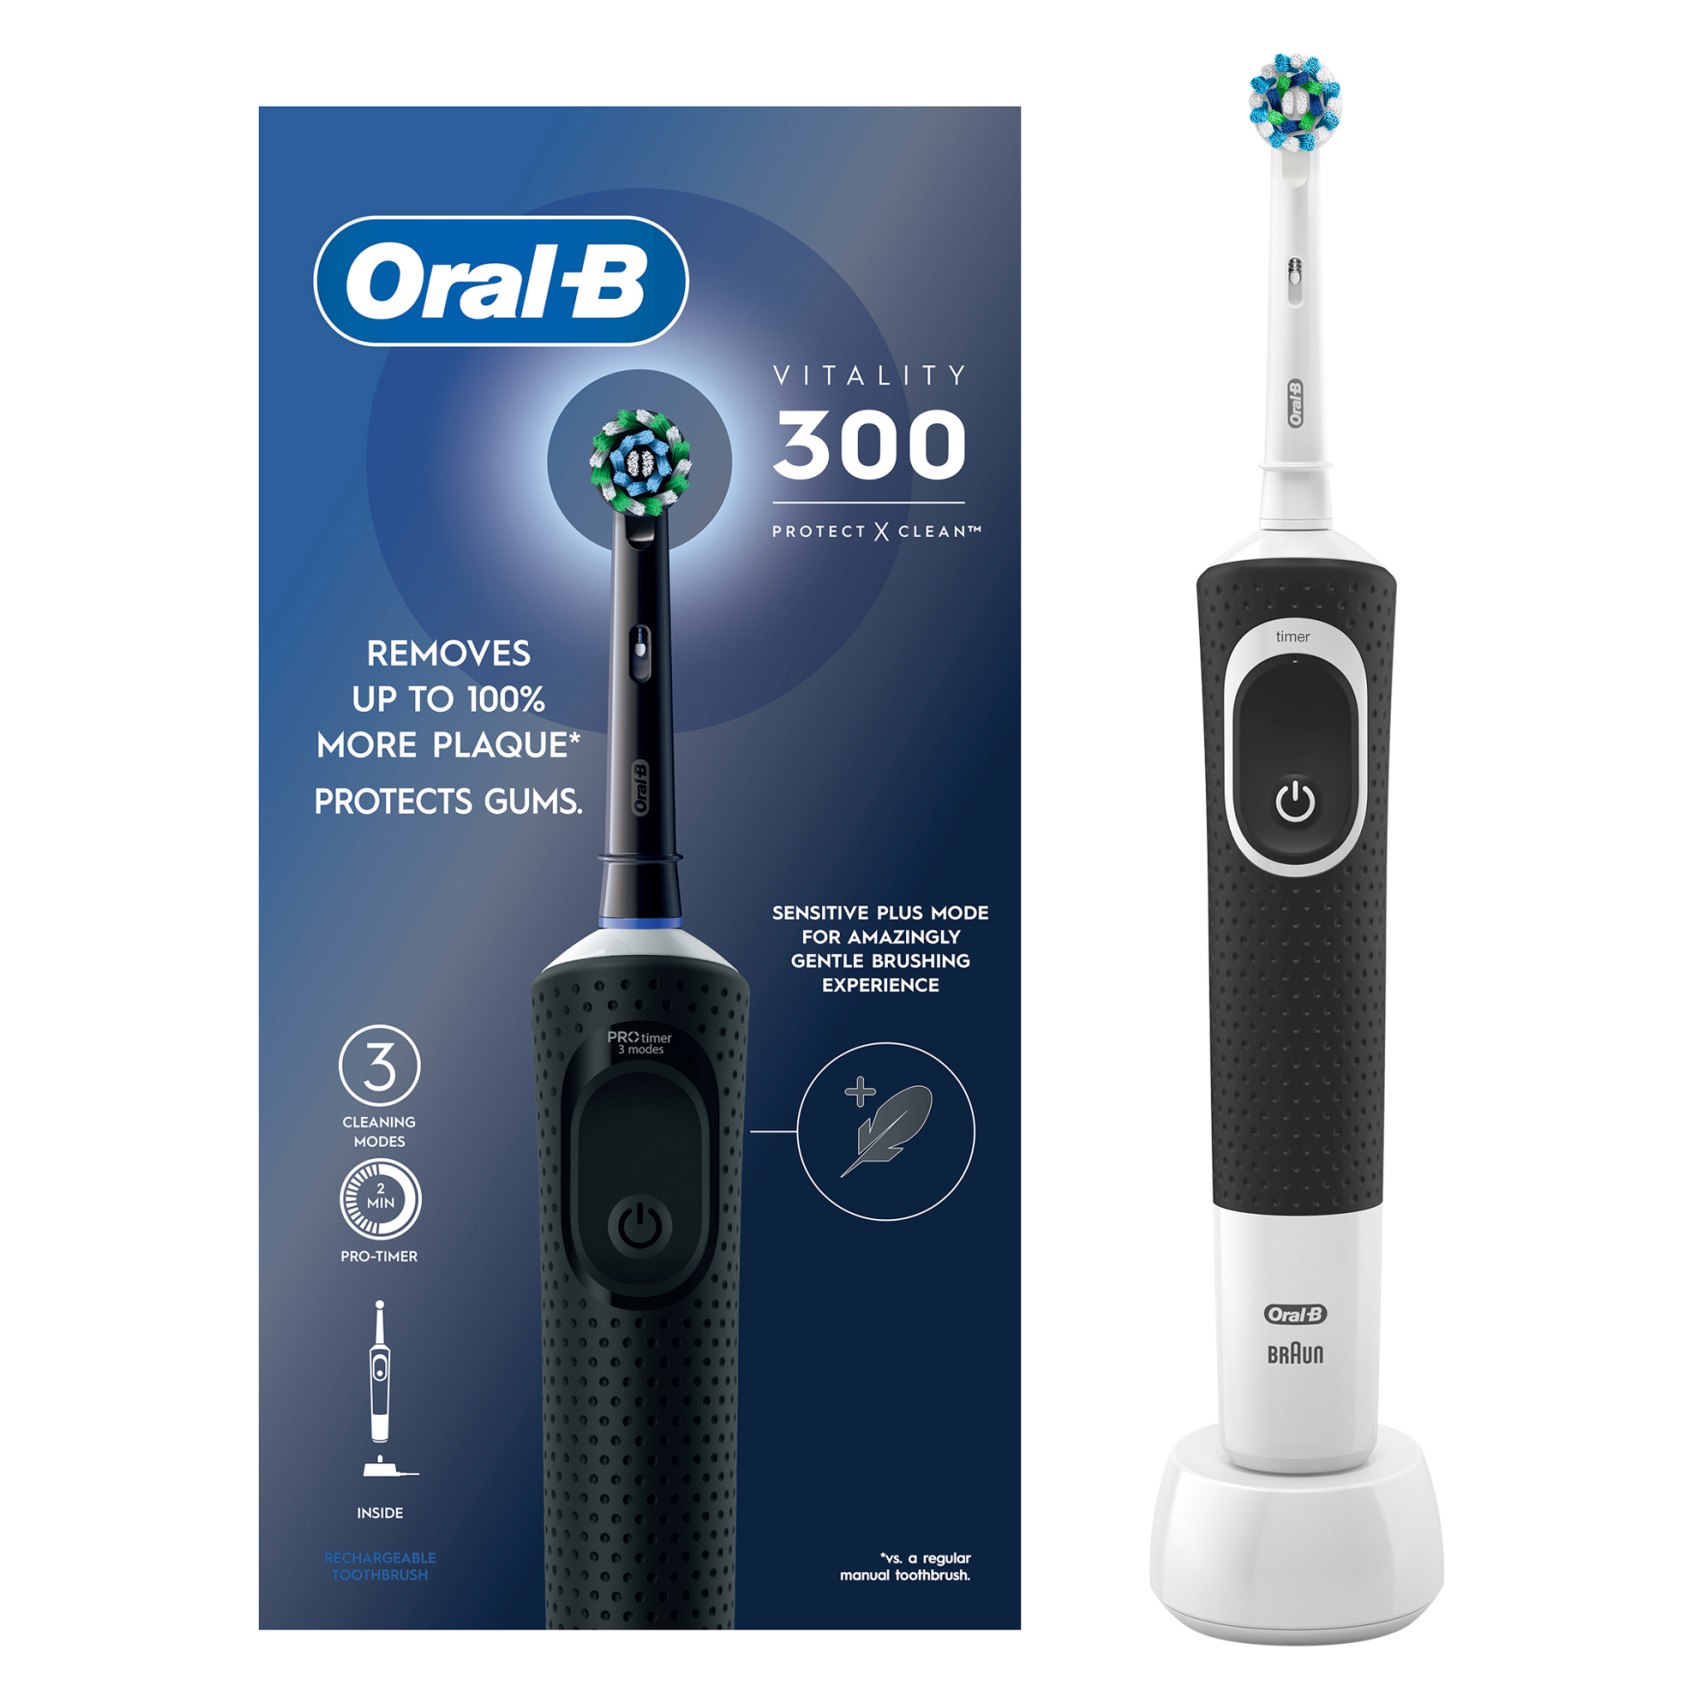 Oral-B Vitality 300 Protect X Clean Rechargeable Toothbrush D103.413.3 Black